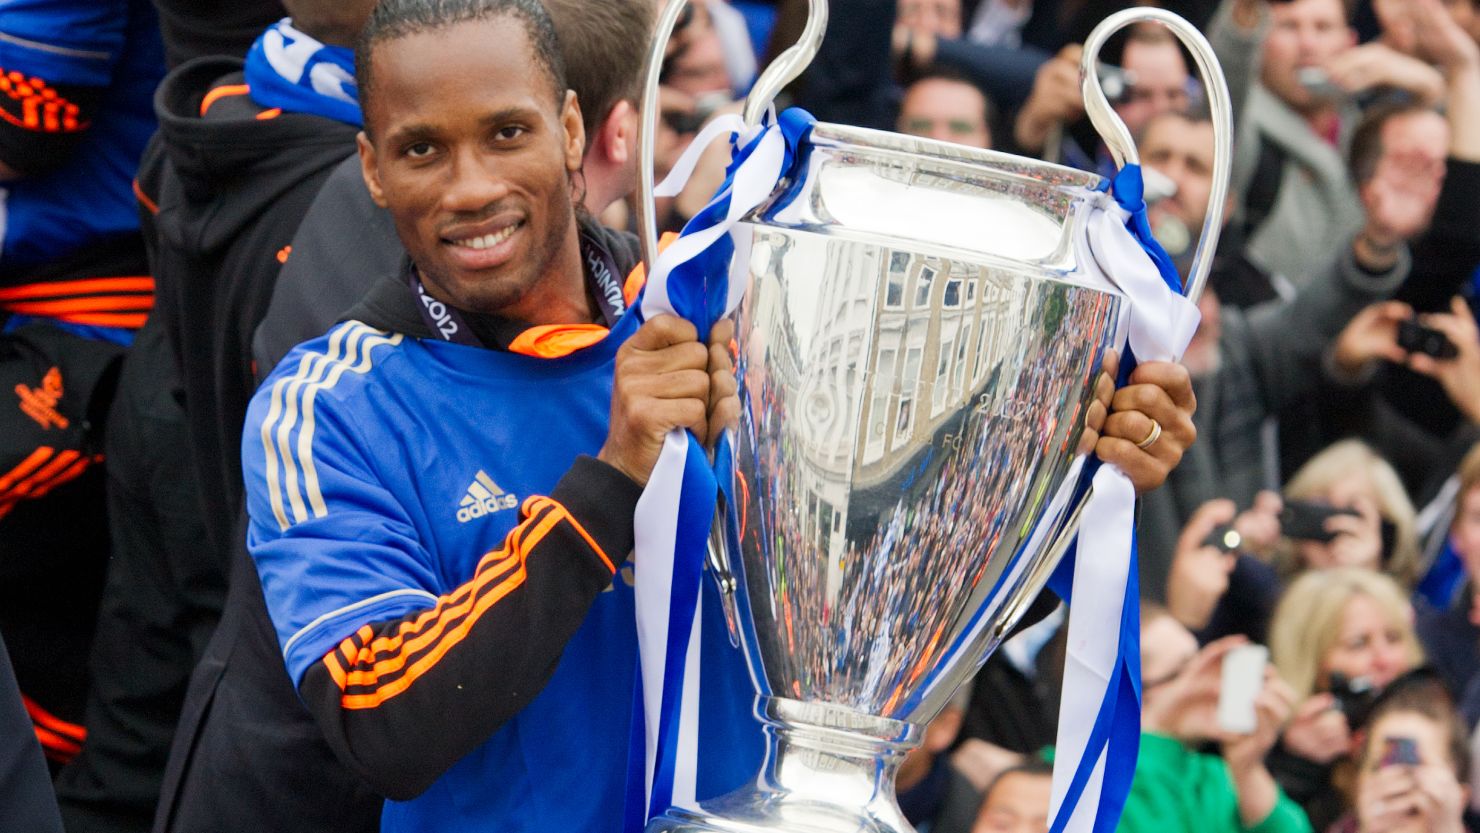 Didier Drogba joined Chelsea in 2004, helping the club to four English titles and the European crown.